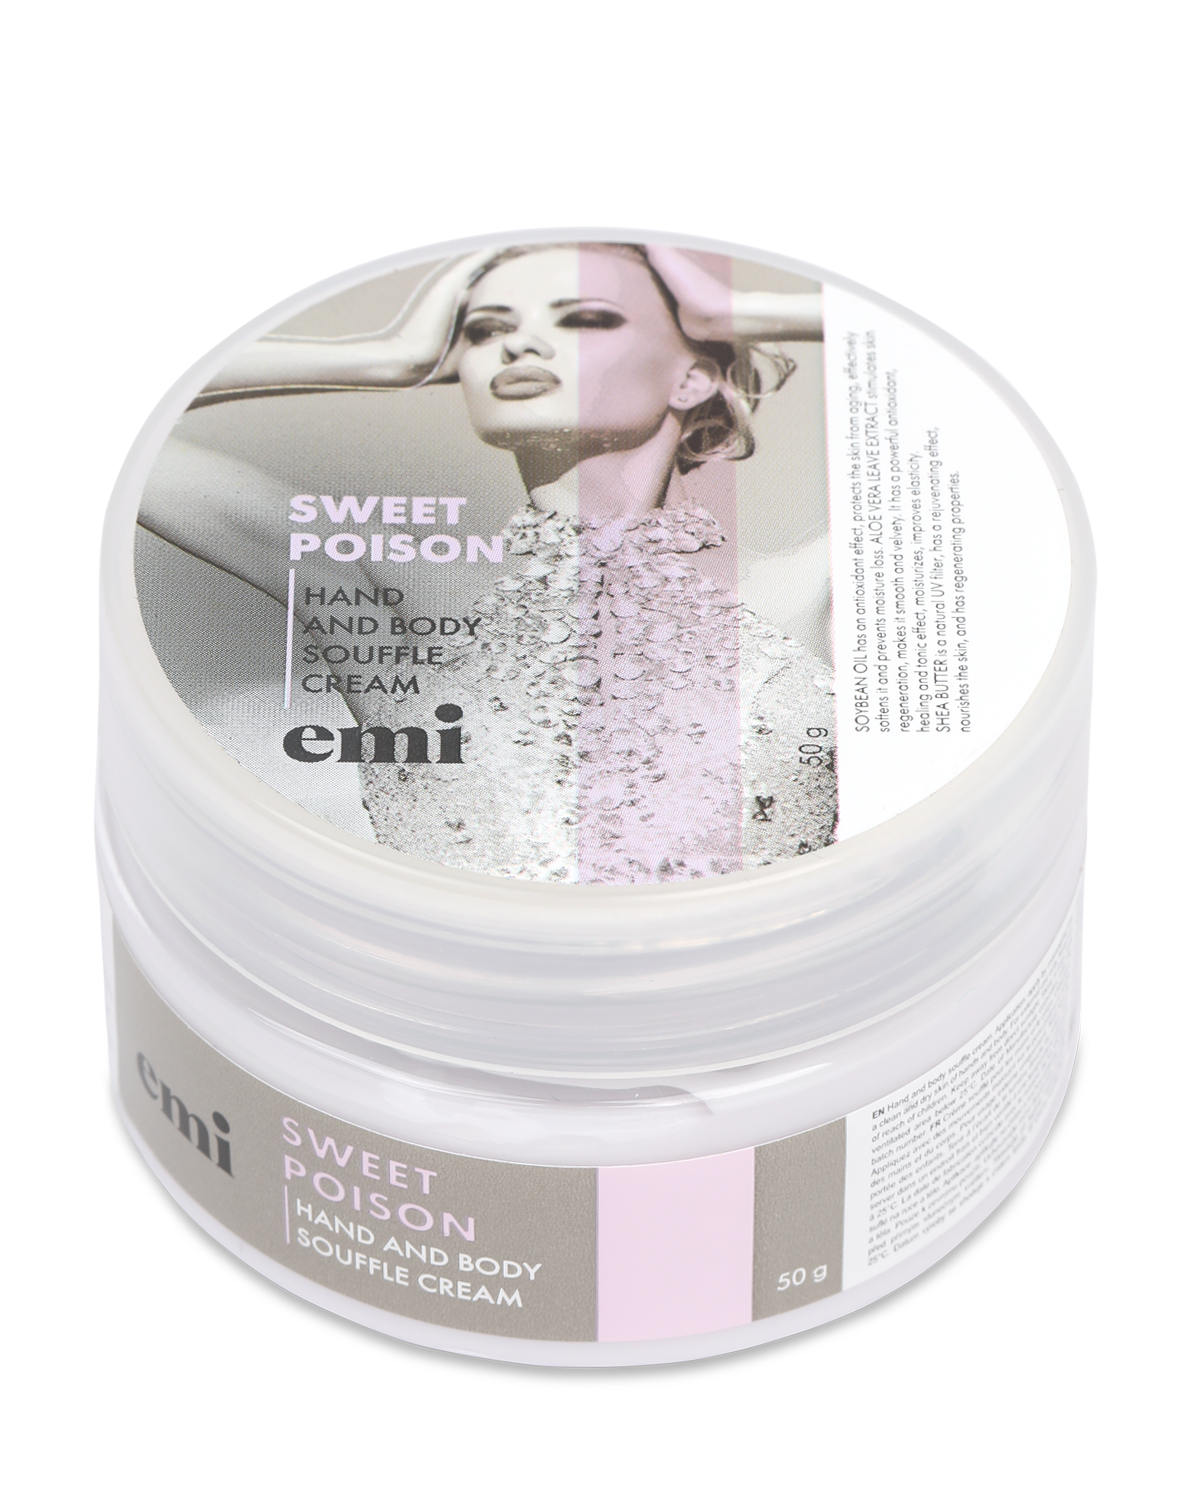 Hand and Body Cream Souffle Sweet Poison, 50 ml.